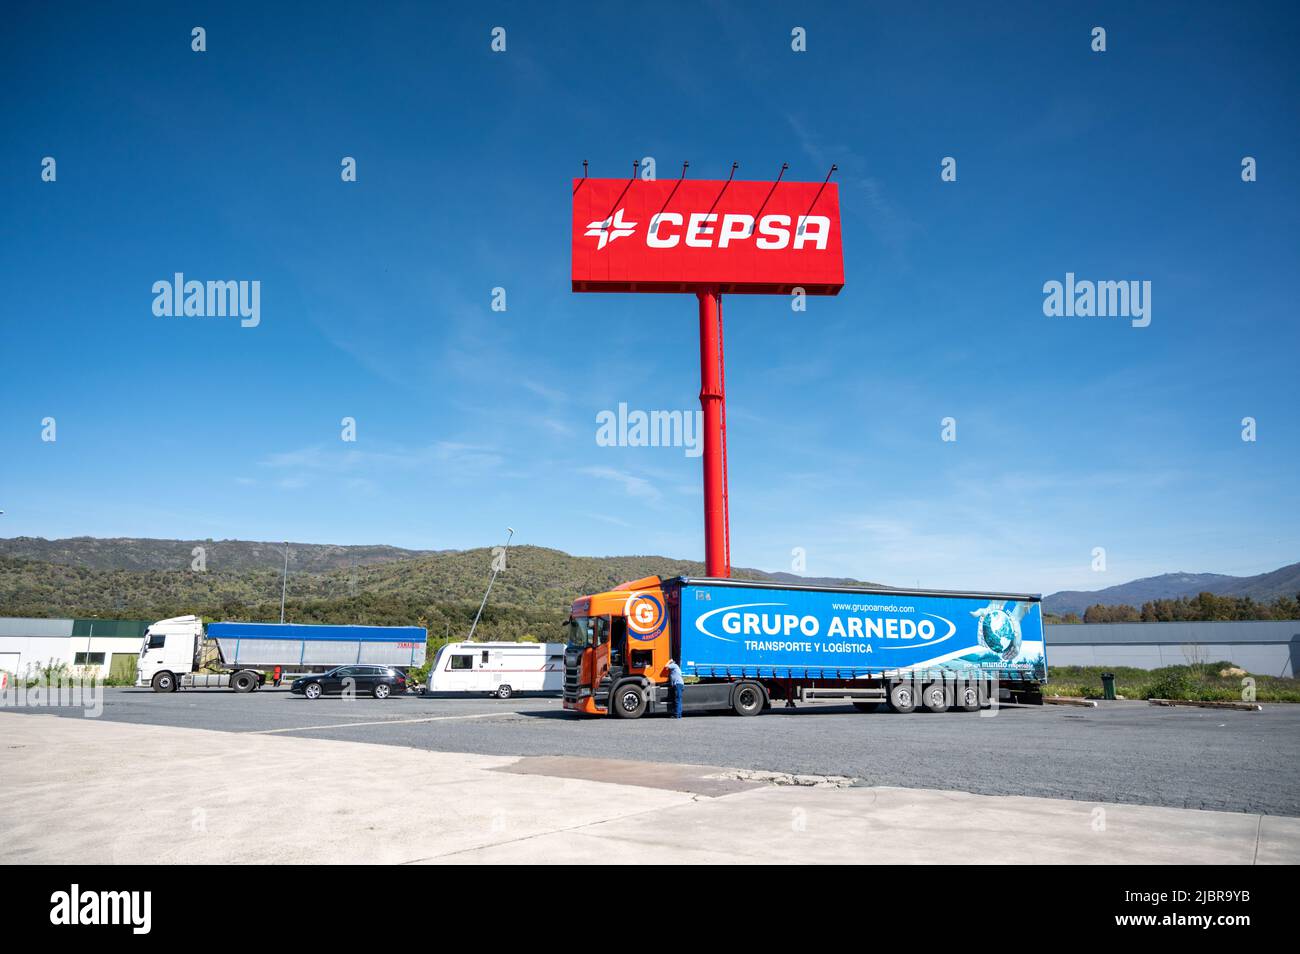 A red CEPSA advertising sign in Spain Europe. Stock Photo